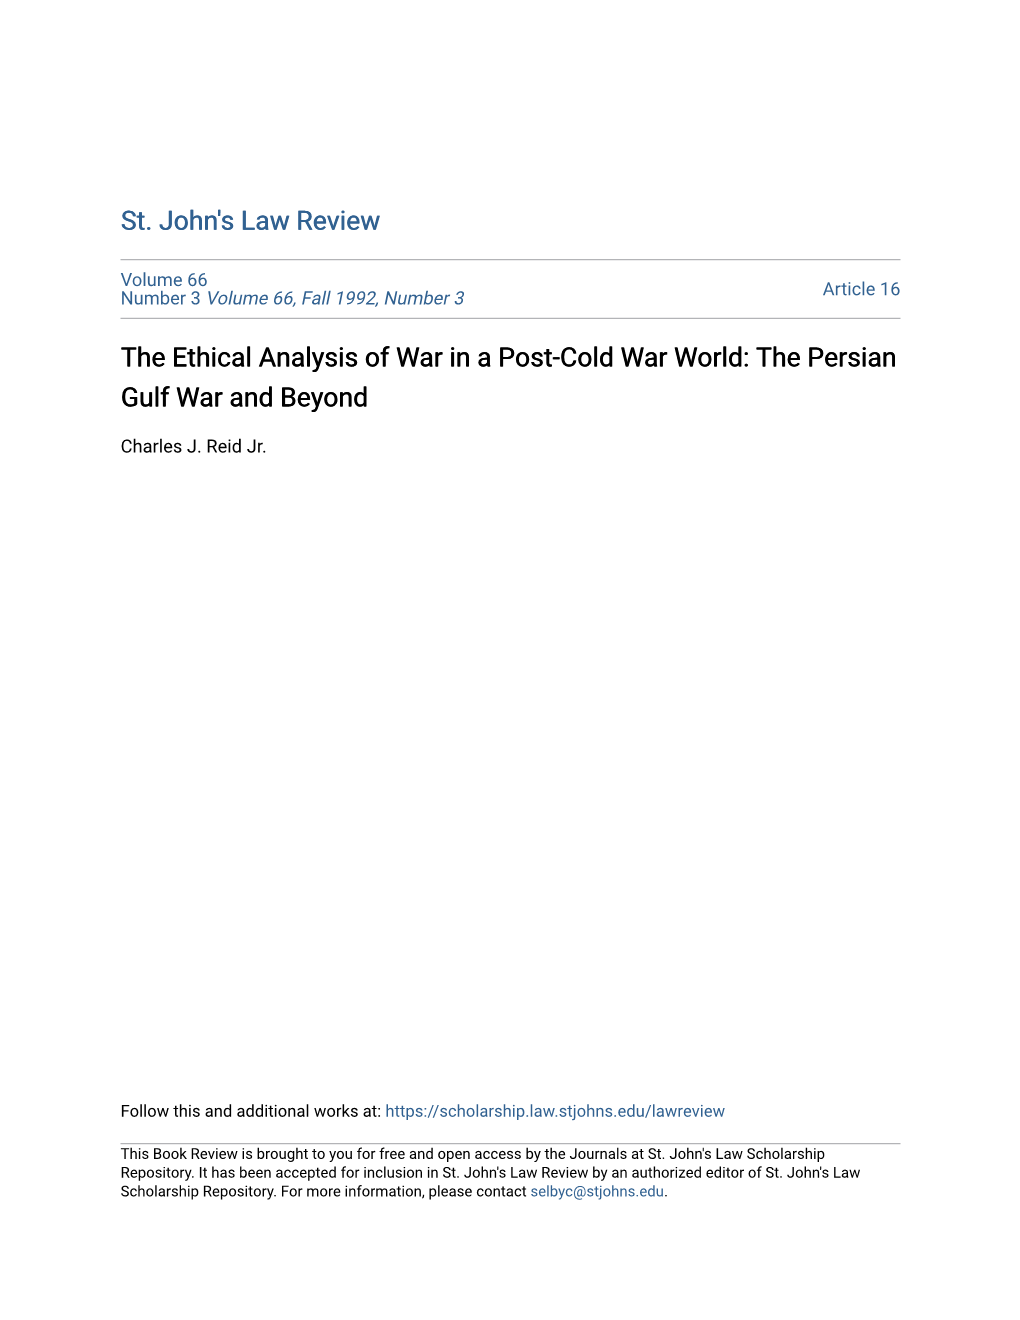 The Persian Gulf War and Beyond